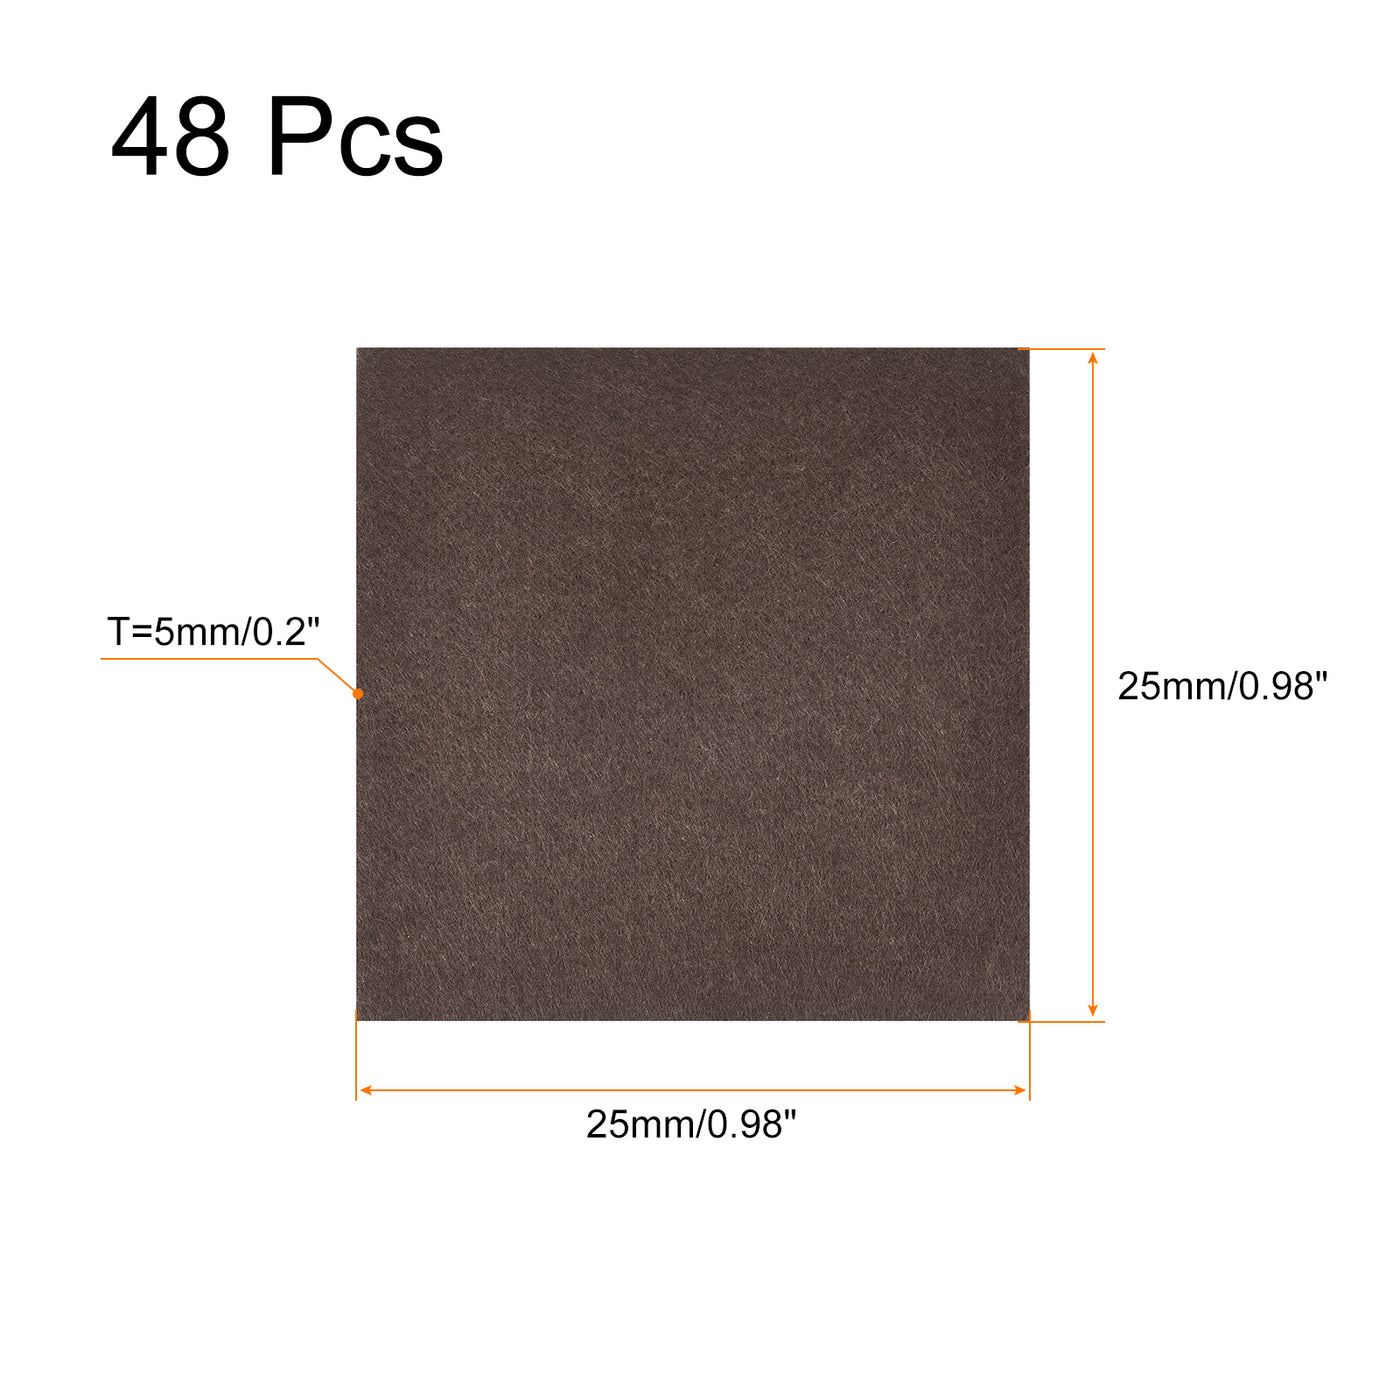 uxcell Uxcell Felt Furniture Pads, 25mm x 25mm Self Adhesive Square Floor Protectors for Furniture Legs Hardwood Floor, Brown 48Pcs